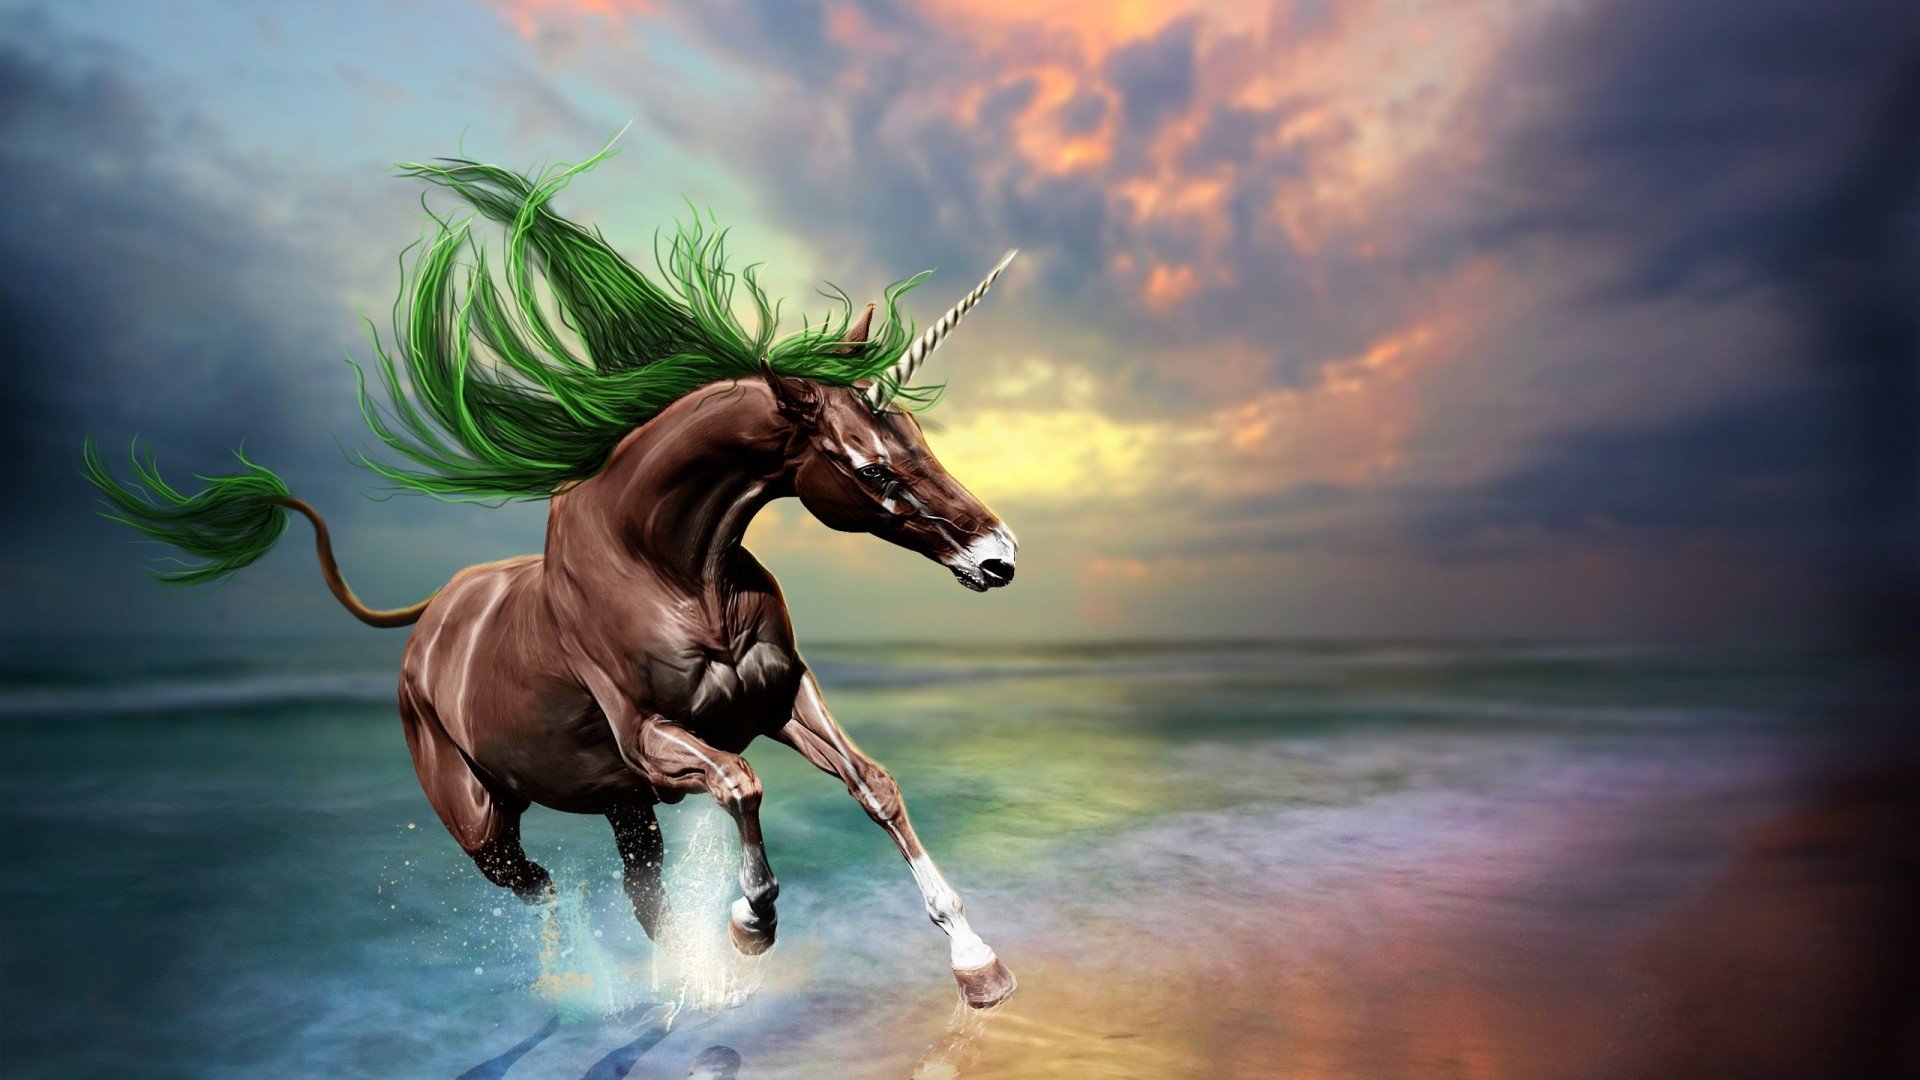 Unicorn Background   Wallpaper High Definition High Quality